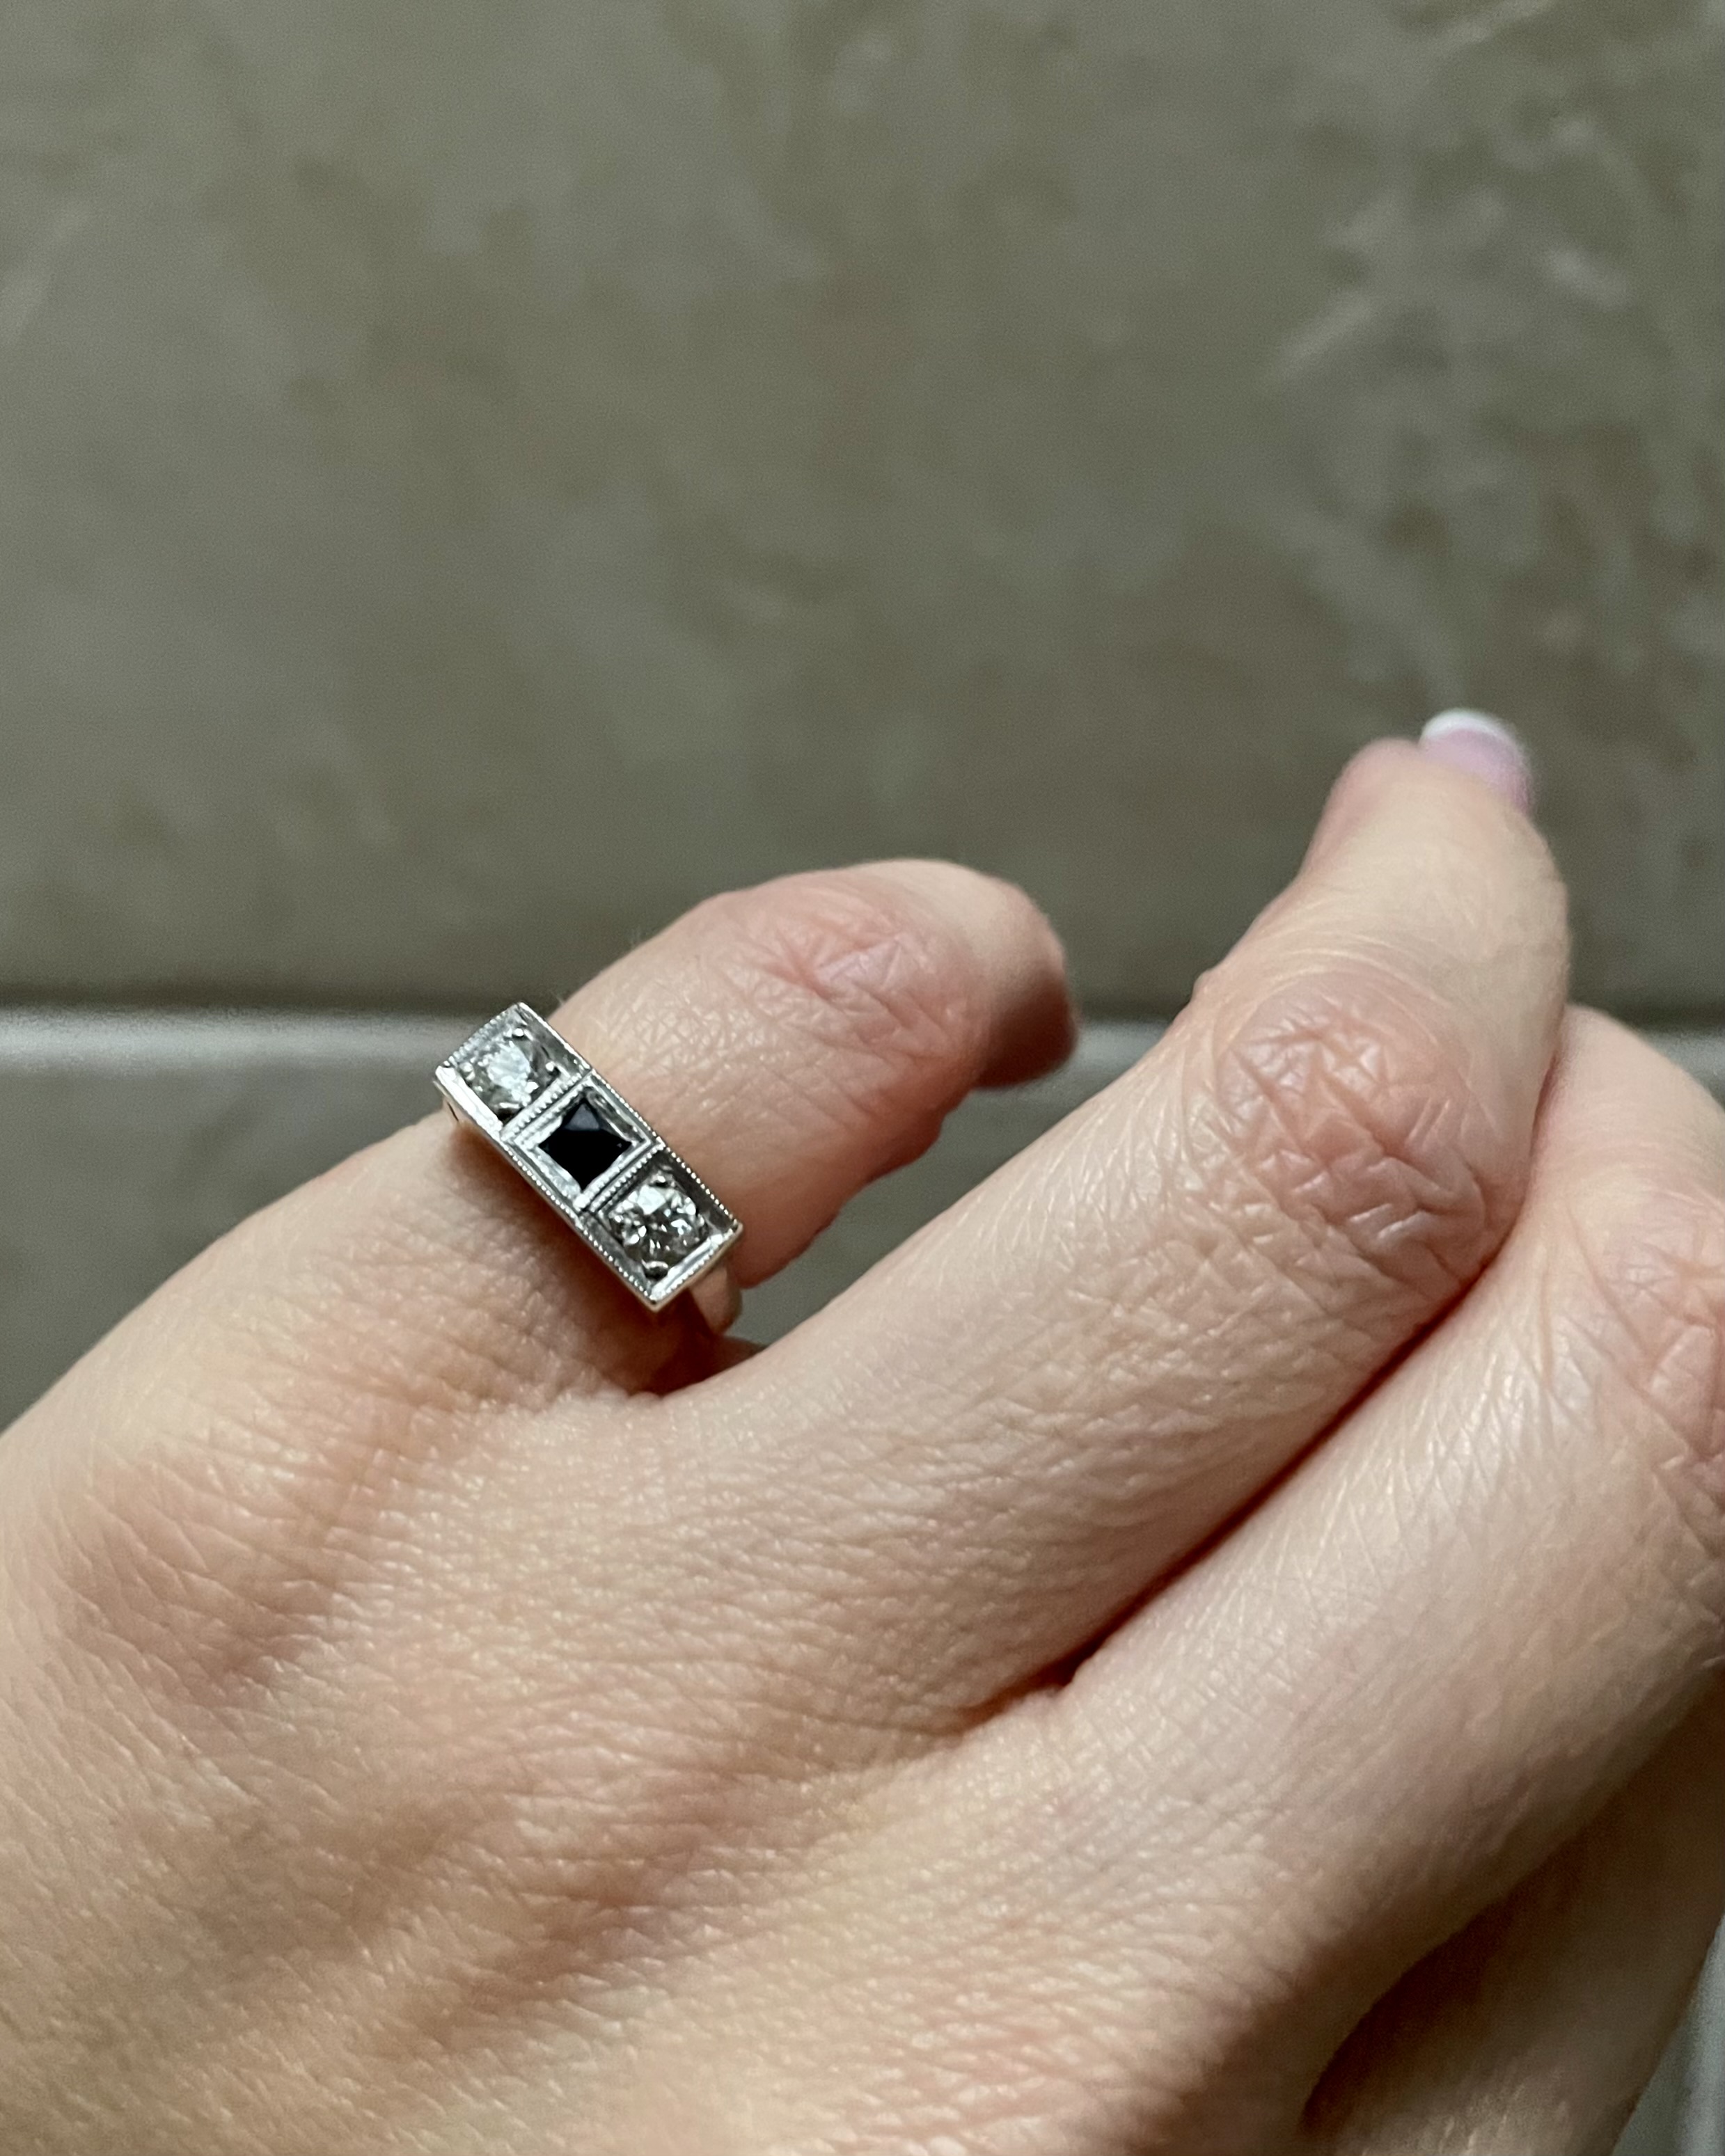 20 Engagement Ring Inspiration Accounts on Instagram and TikTok